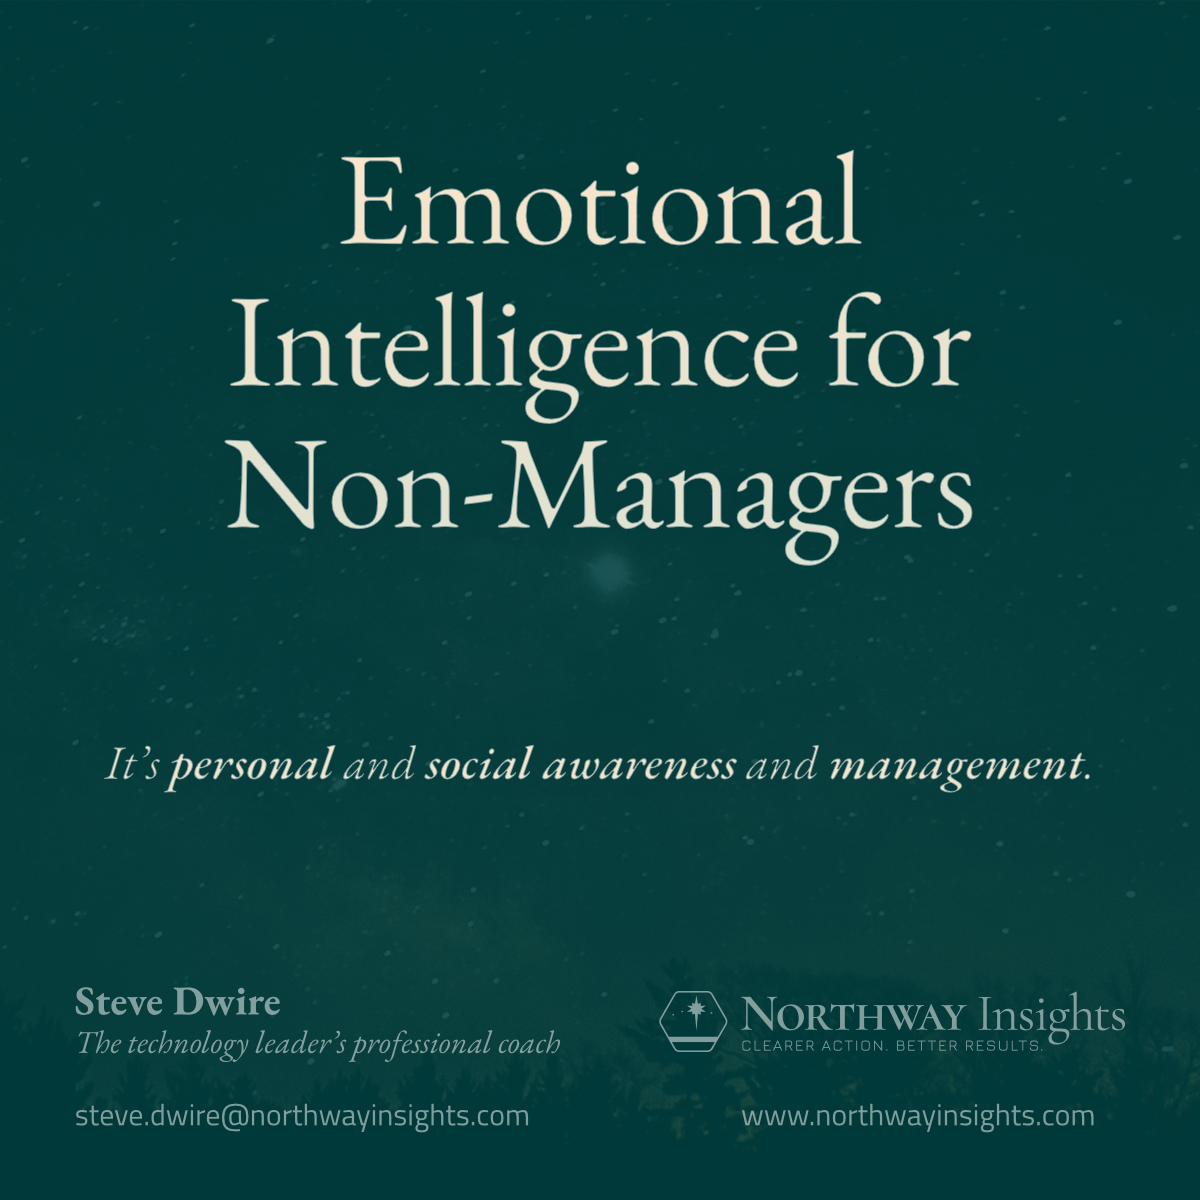 Emotional Intelligence for Non-Managers (It is personal and social awareness and management.)